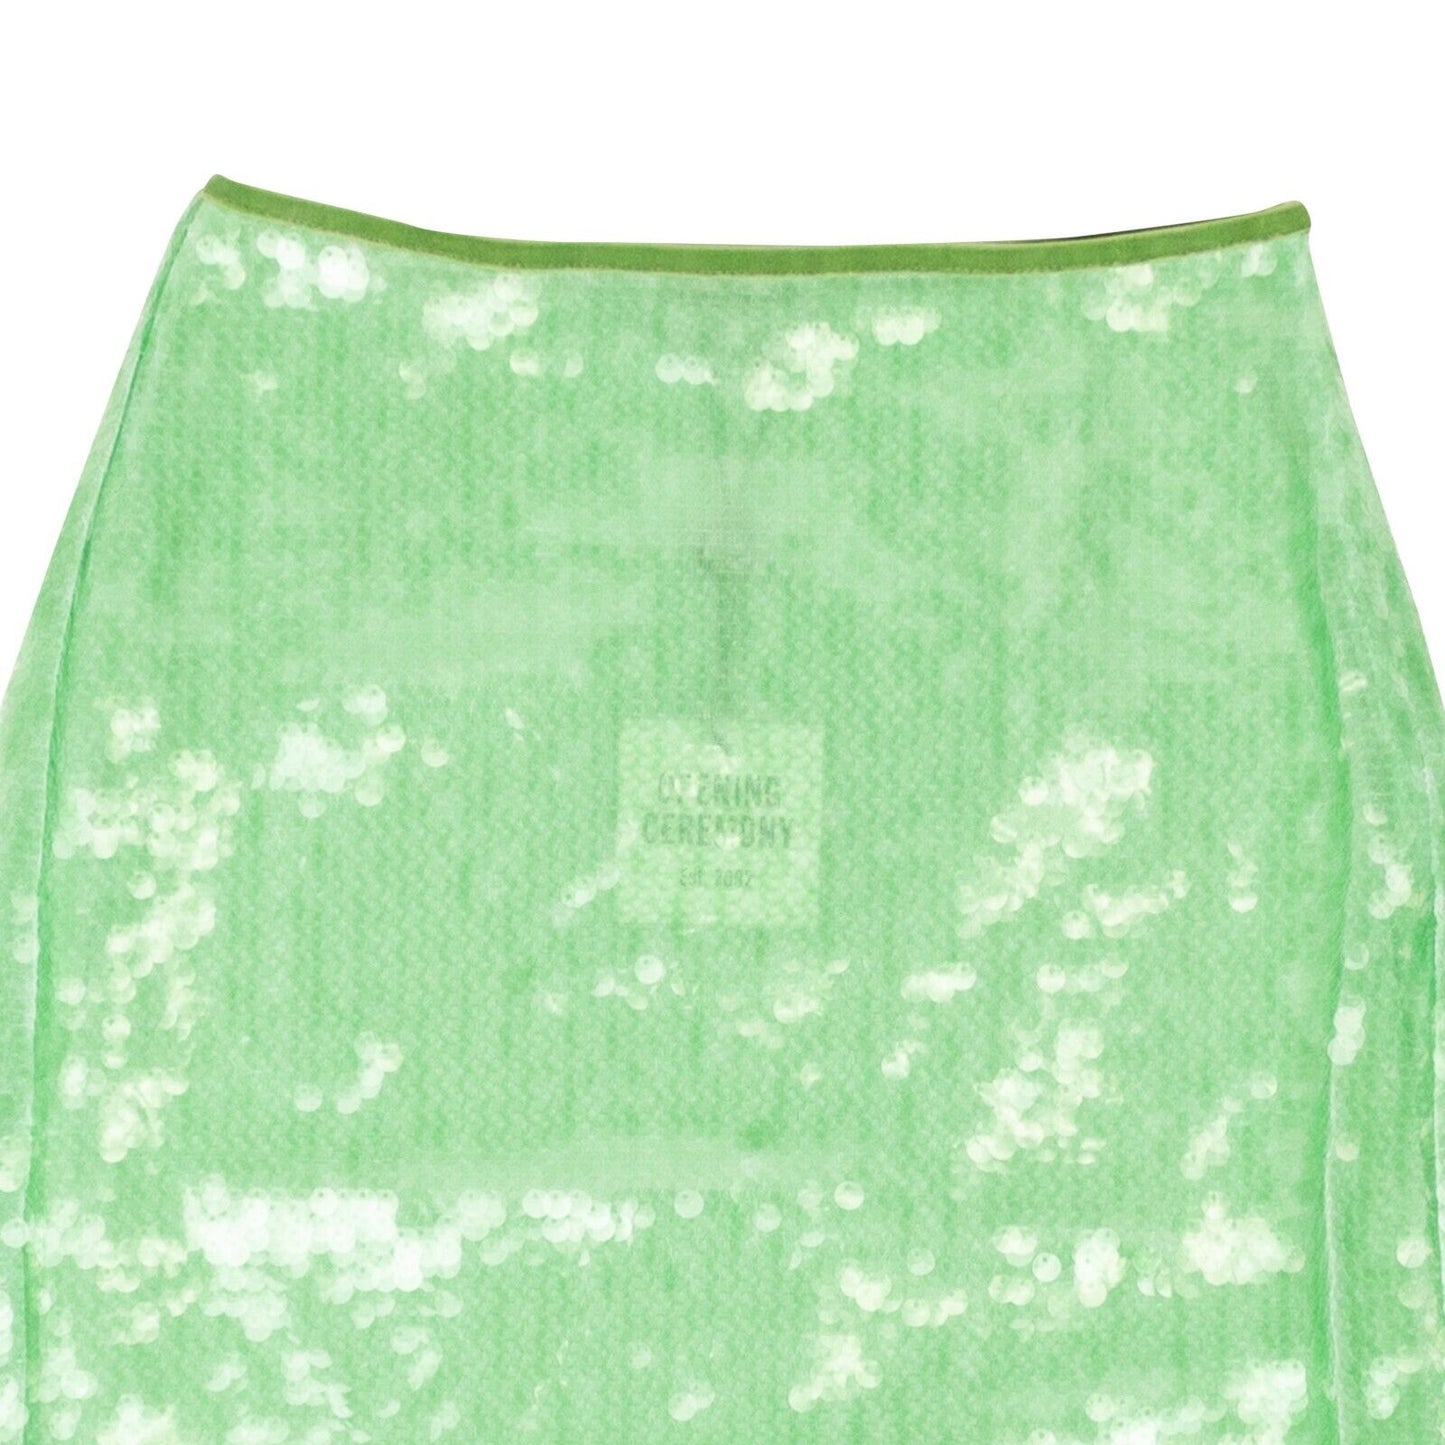 Opening Ceremony Paillette Skirt - Sage